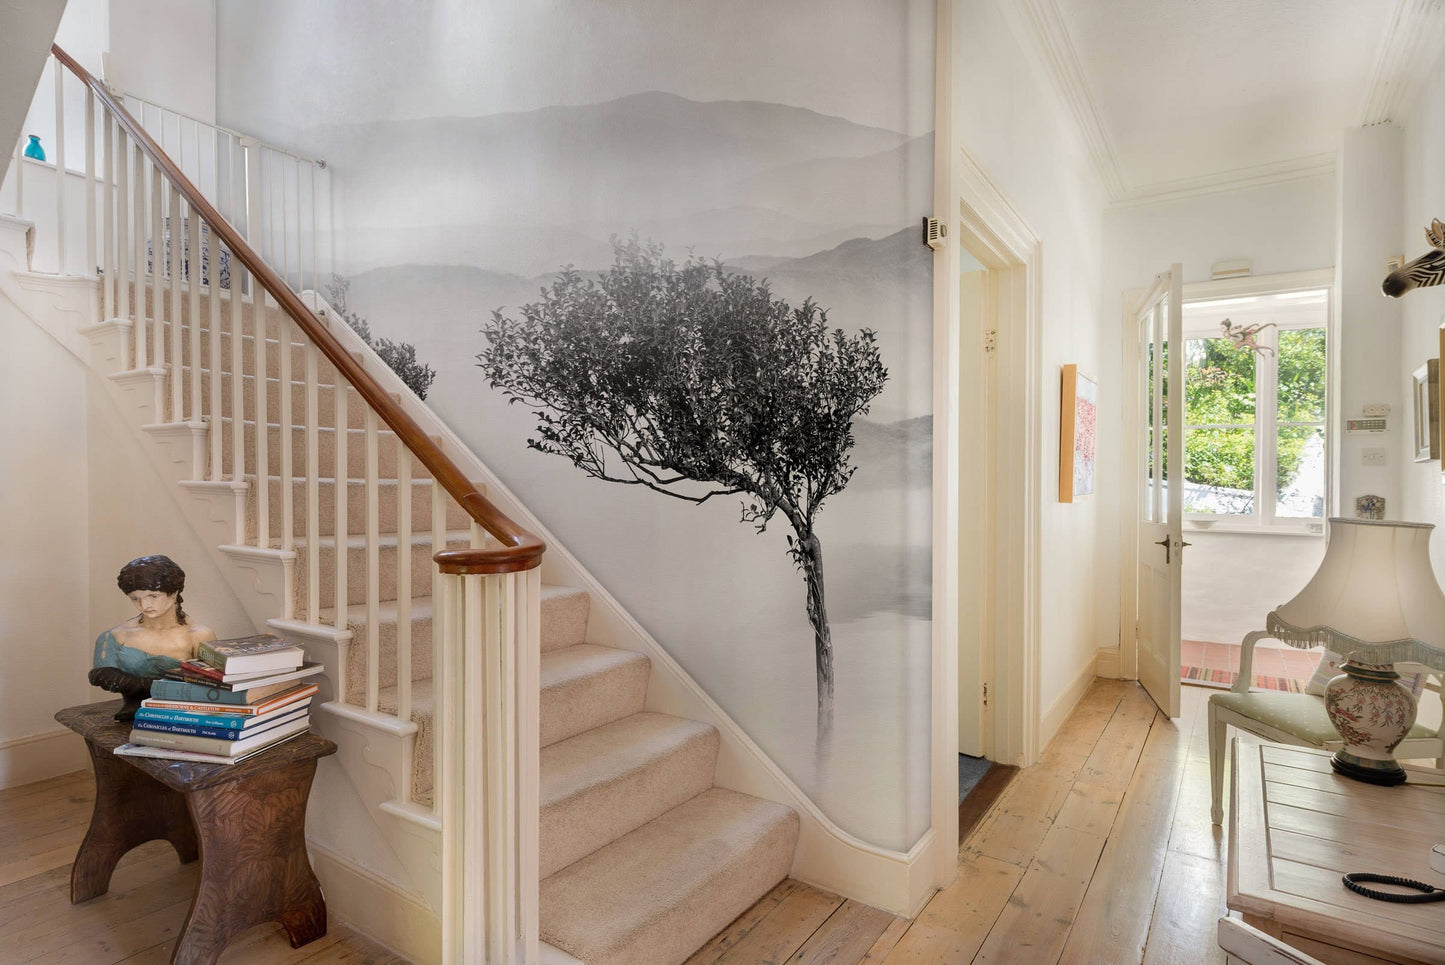 Wallpaper mural for room decoration including desolate trees and a lake.